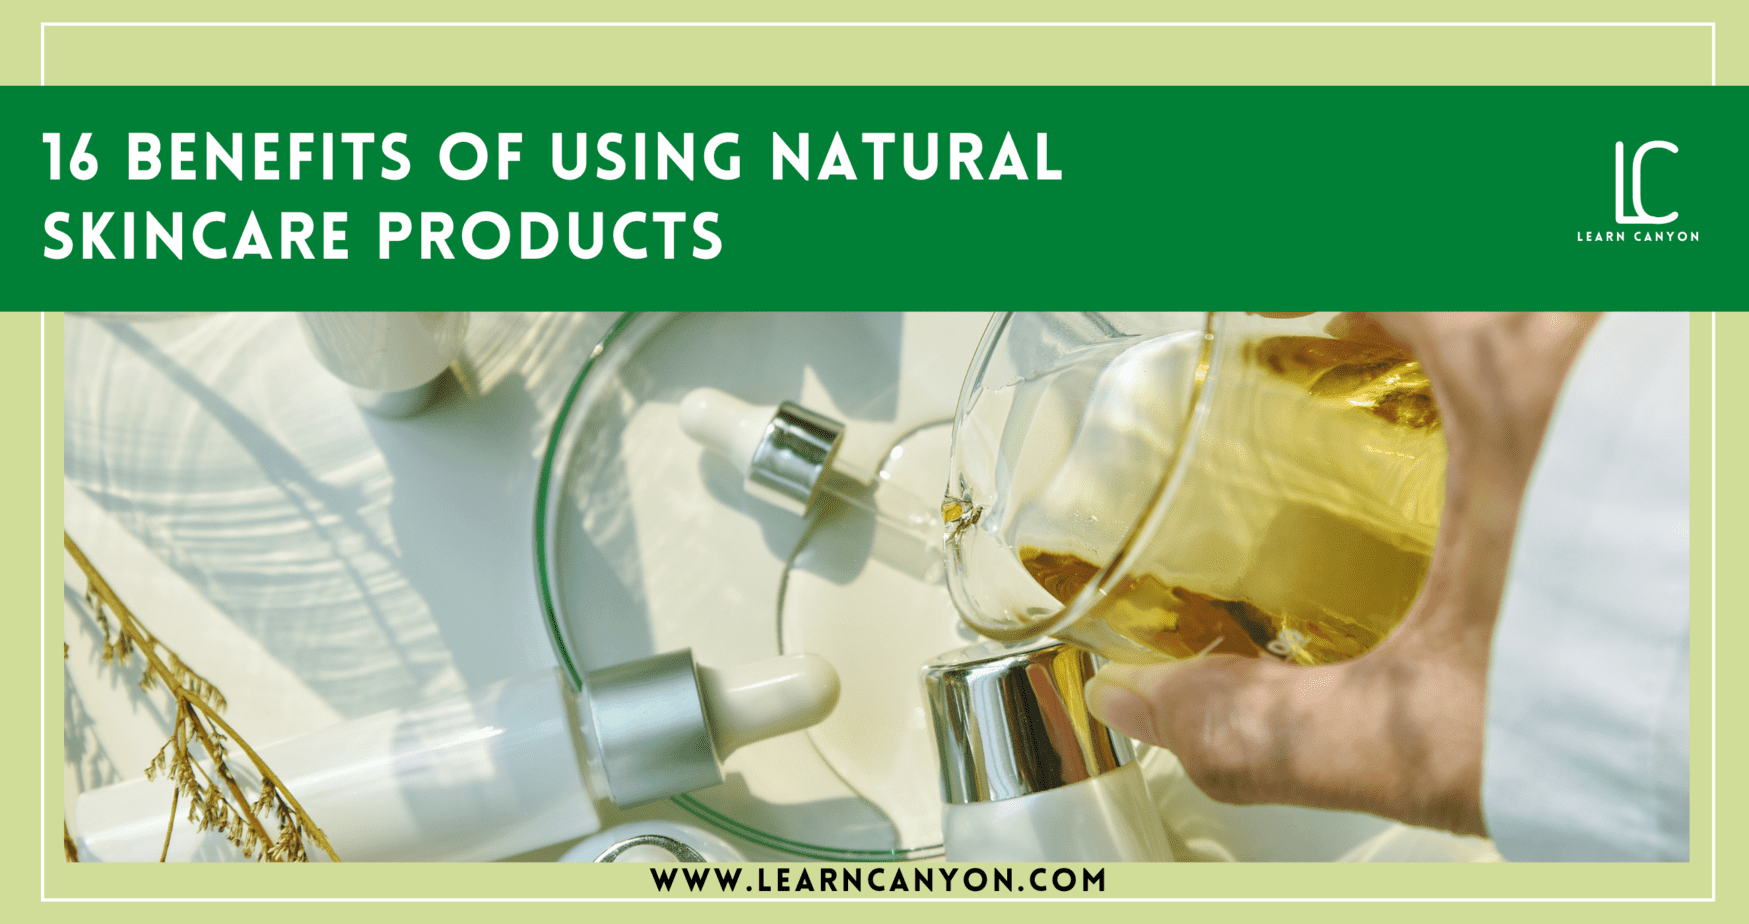 WHAT ARE THE MAIN BENEFITS OF USING NATURAL PRODUCTS? - Vevera